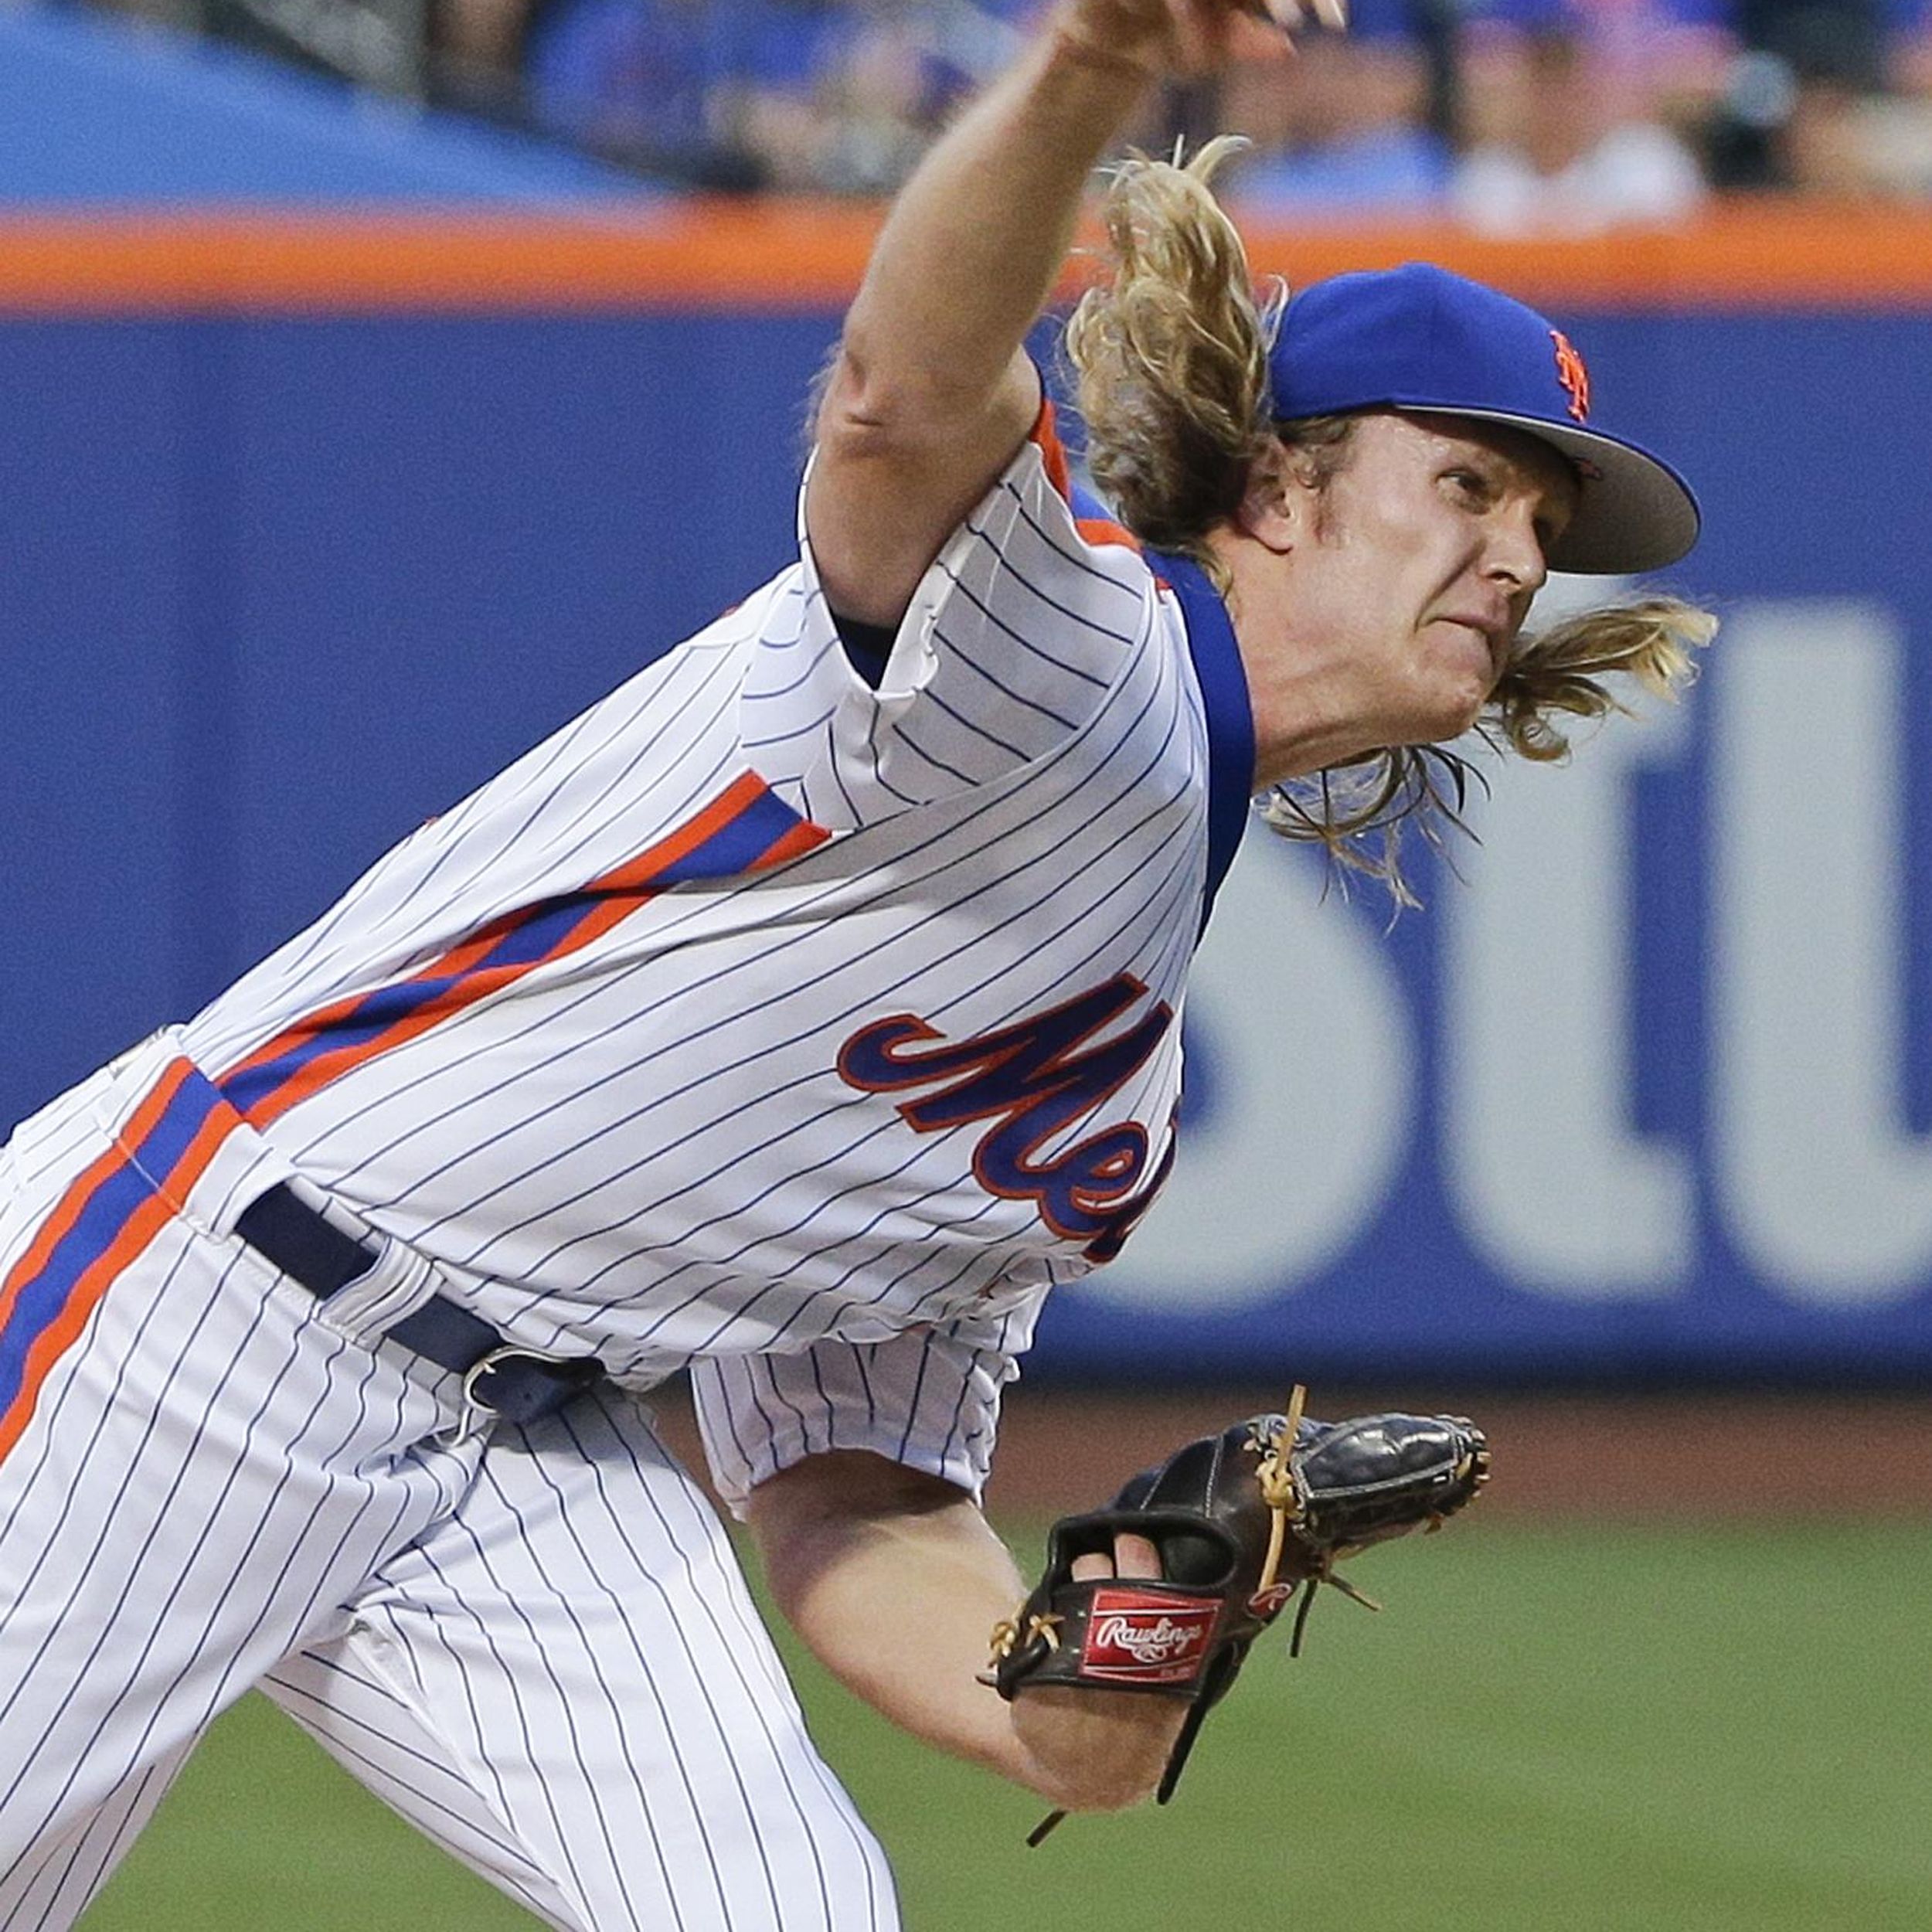 Mets' Noah Syndergaard the latest pitcher injured in a 'system that's